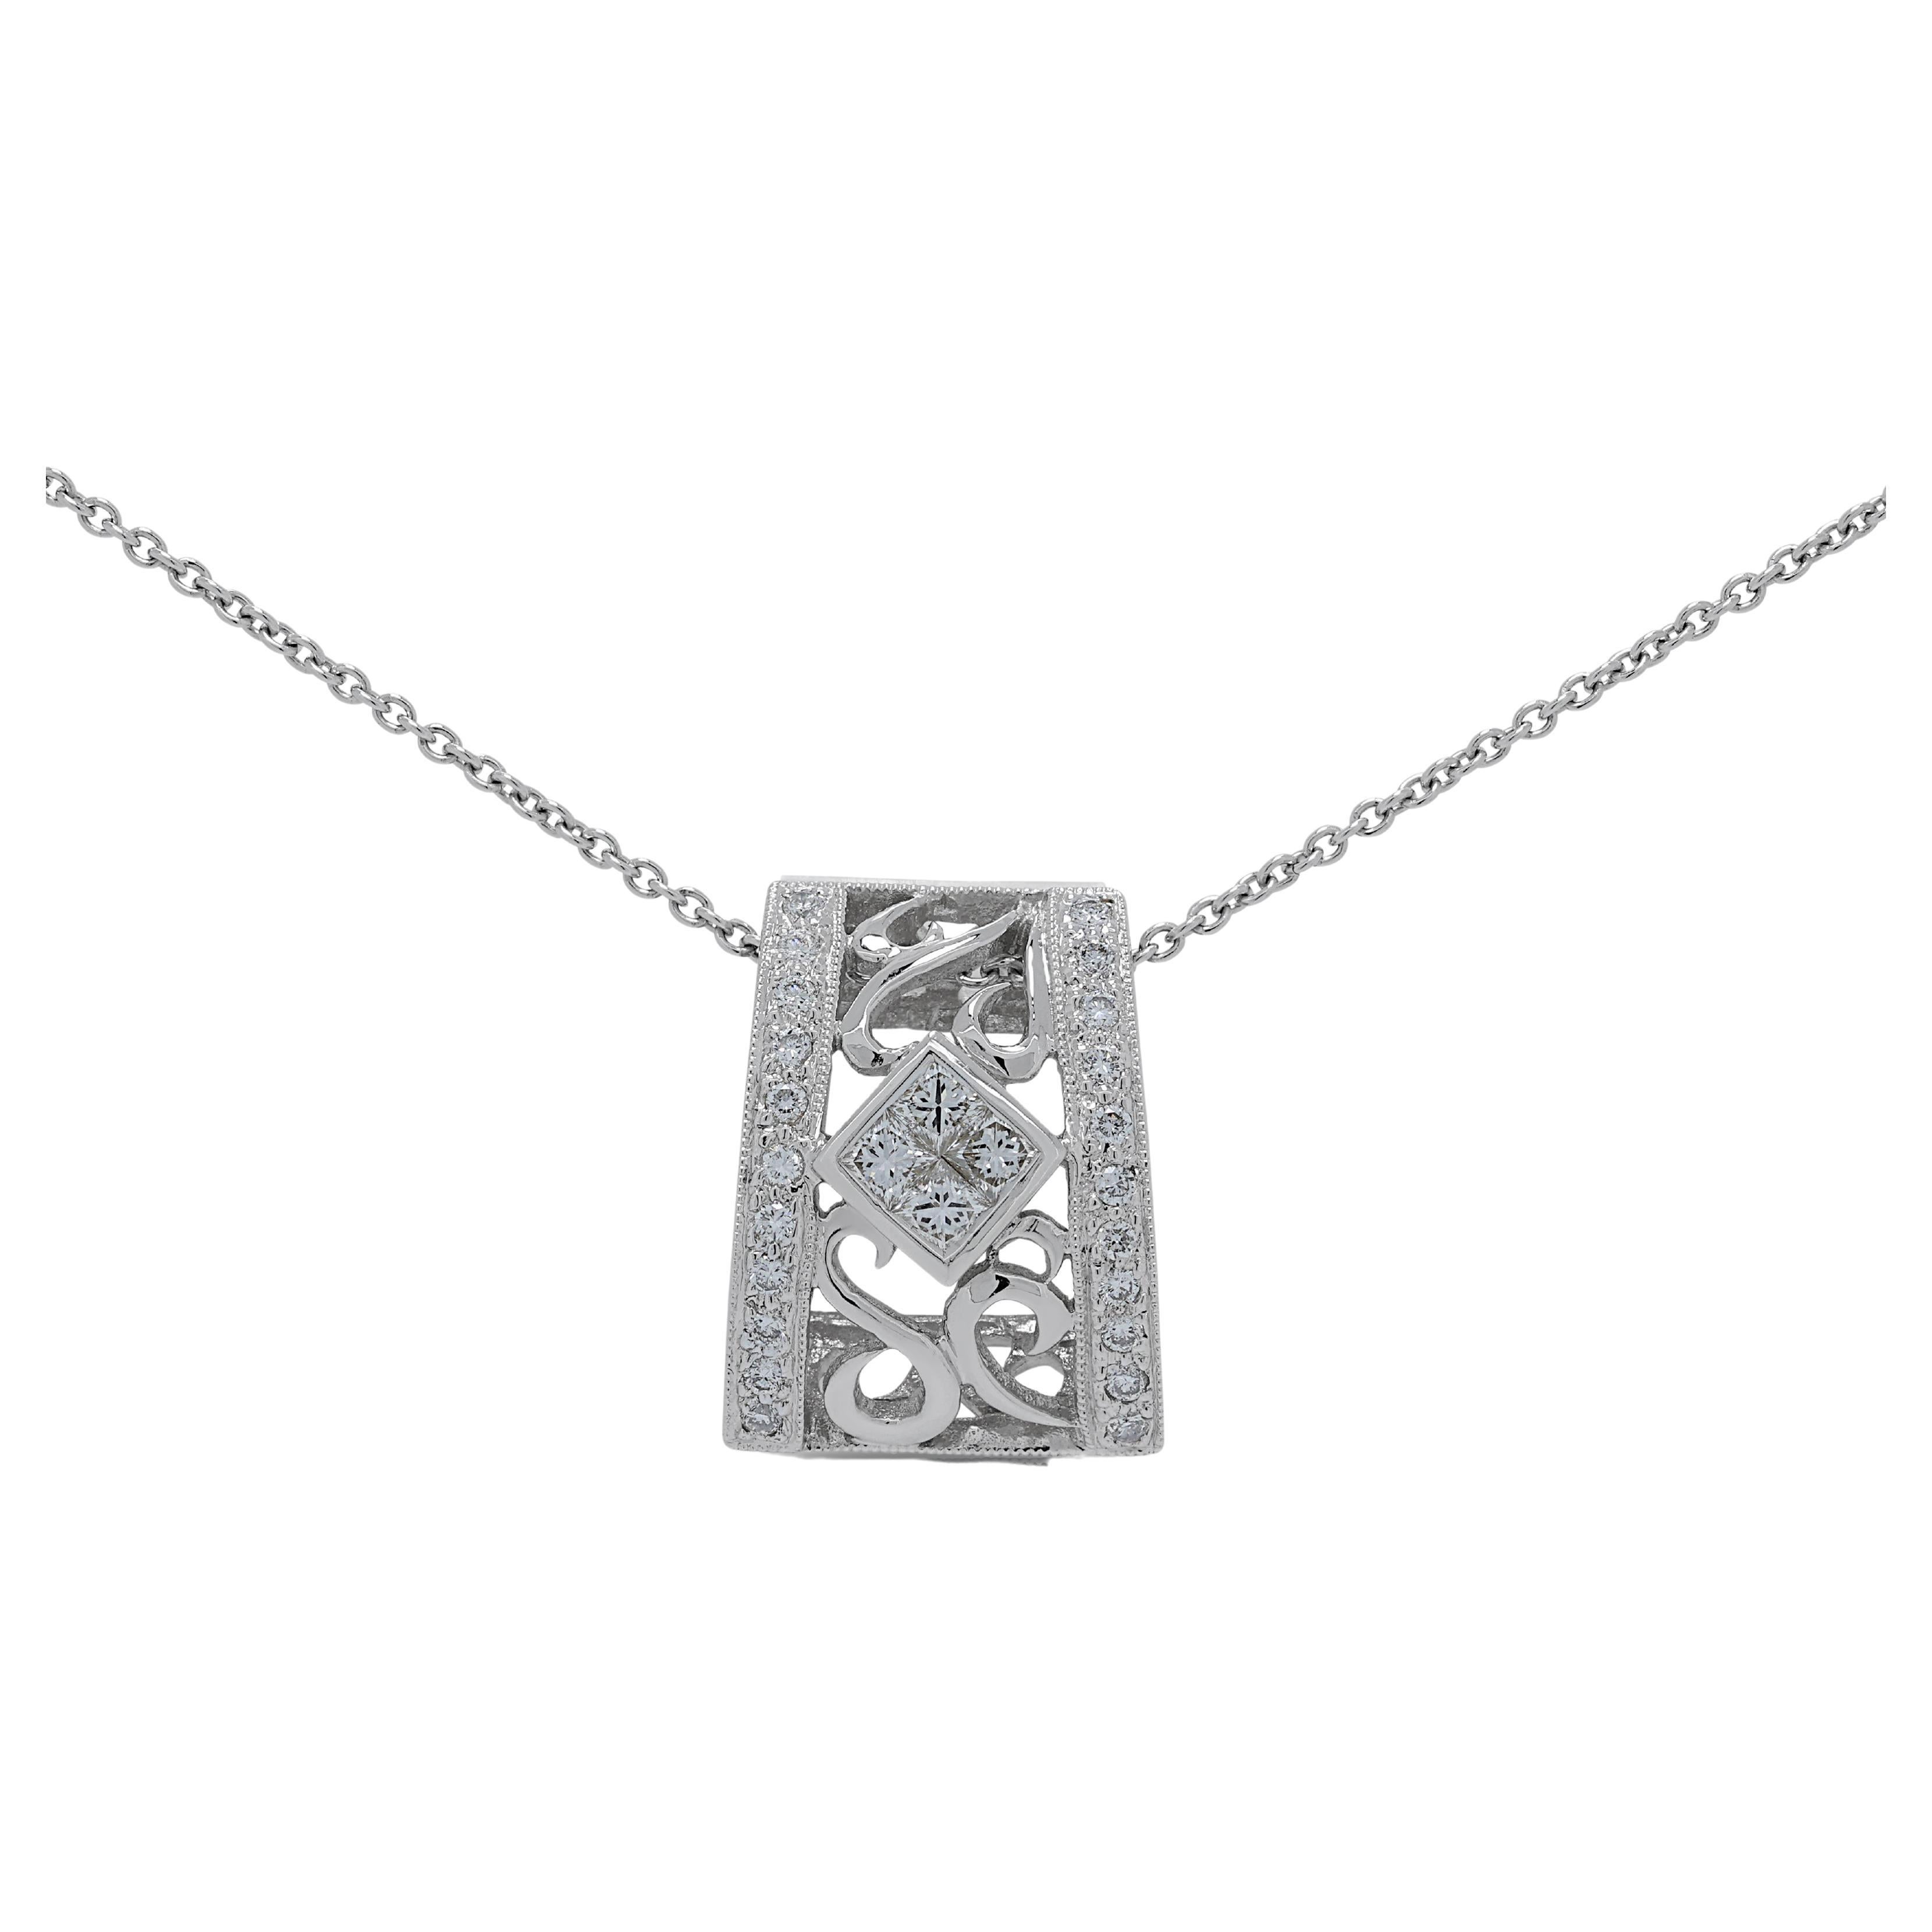 Luminous 0.30ct Diamonds Pendant in 18K White Gold - (Chain not Included)